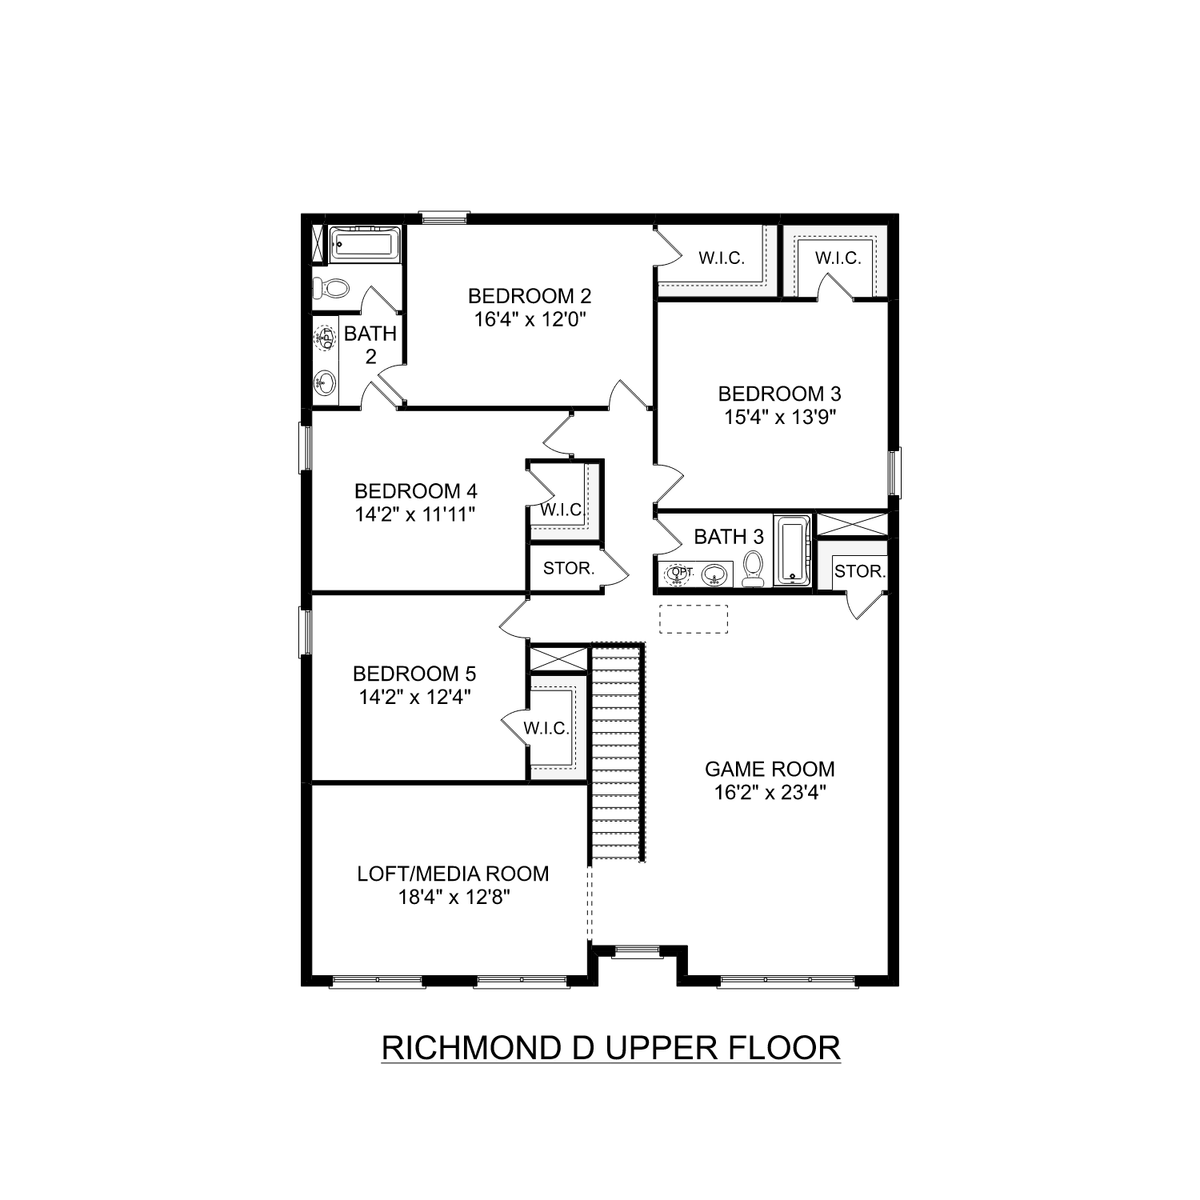 2 - The Richmond D floor plan layout for 227 Irish Hill Drive in Davidson Homes' Walker's Hill community.